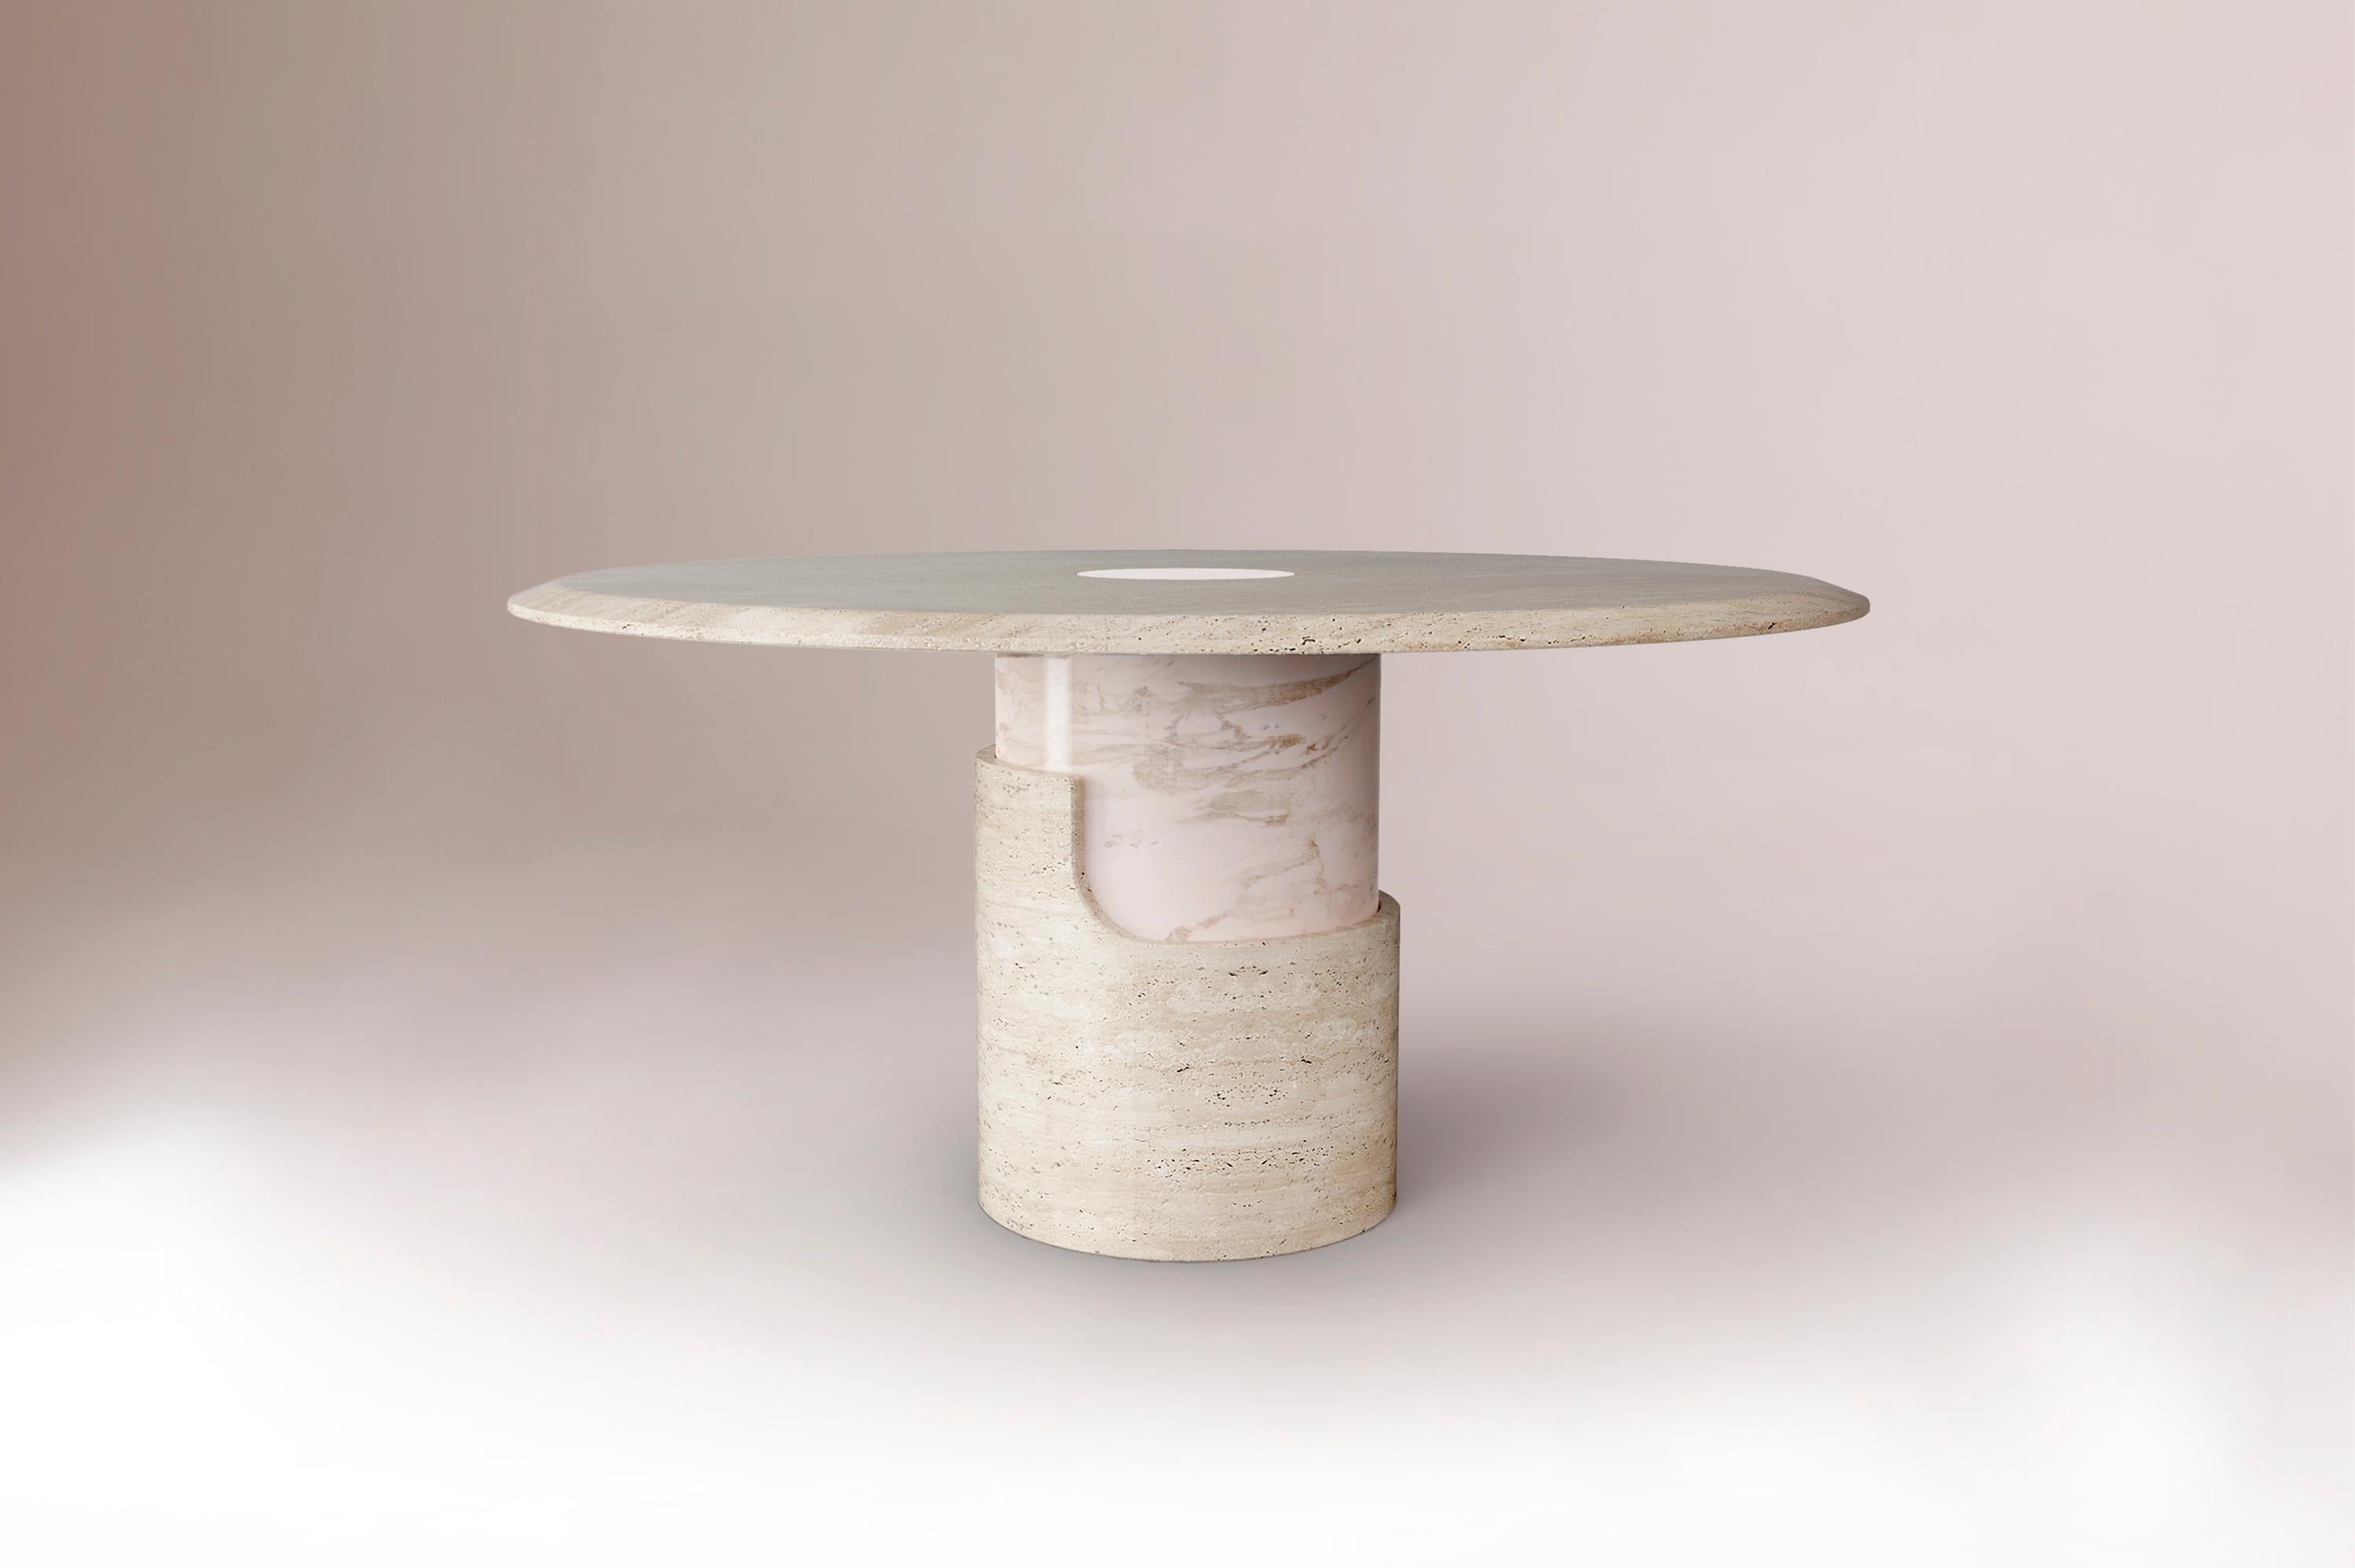 Braque 120 Contemporary Dining Table by Dooq
Dimensions:  D 120 x H 55 cm
Materials: Entirely hand made in marble

Product
The Braque Side Table is an elegant and slick side table created by Dooq. Braque is entirely hand made in marble, with a